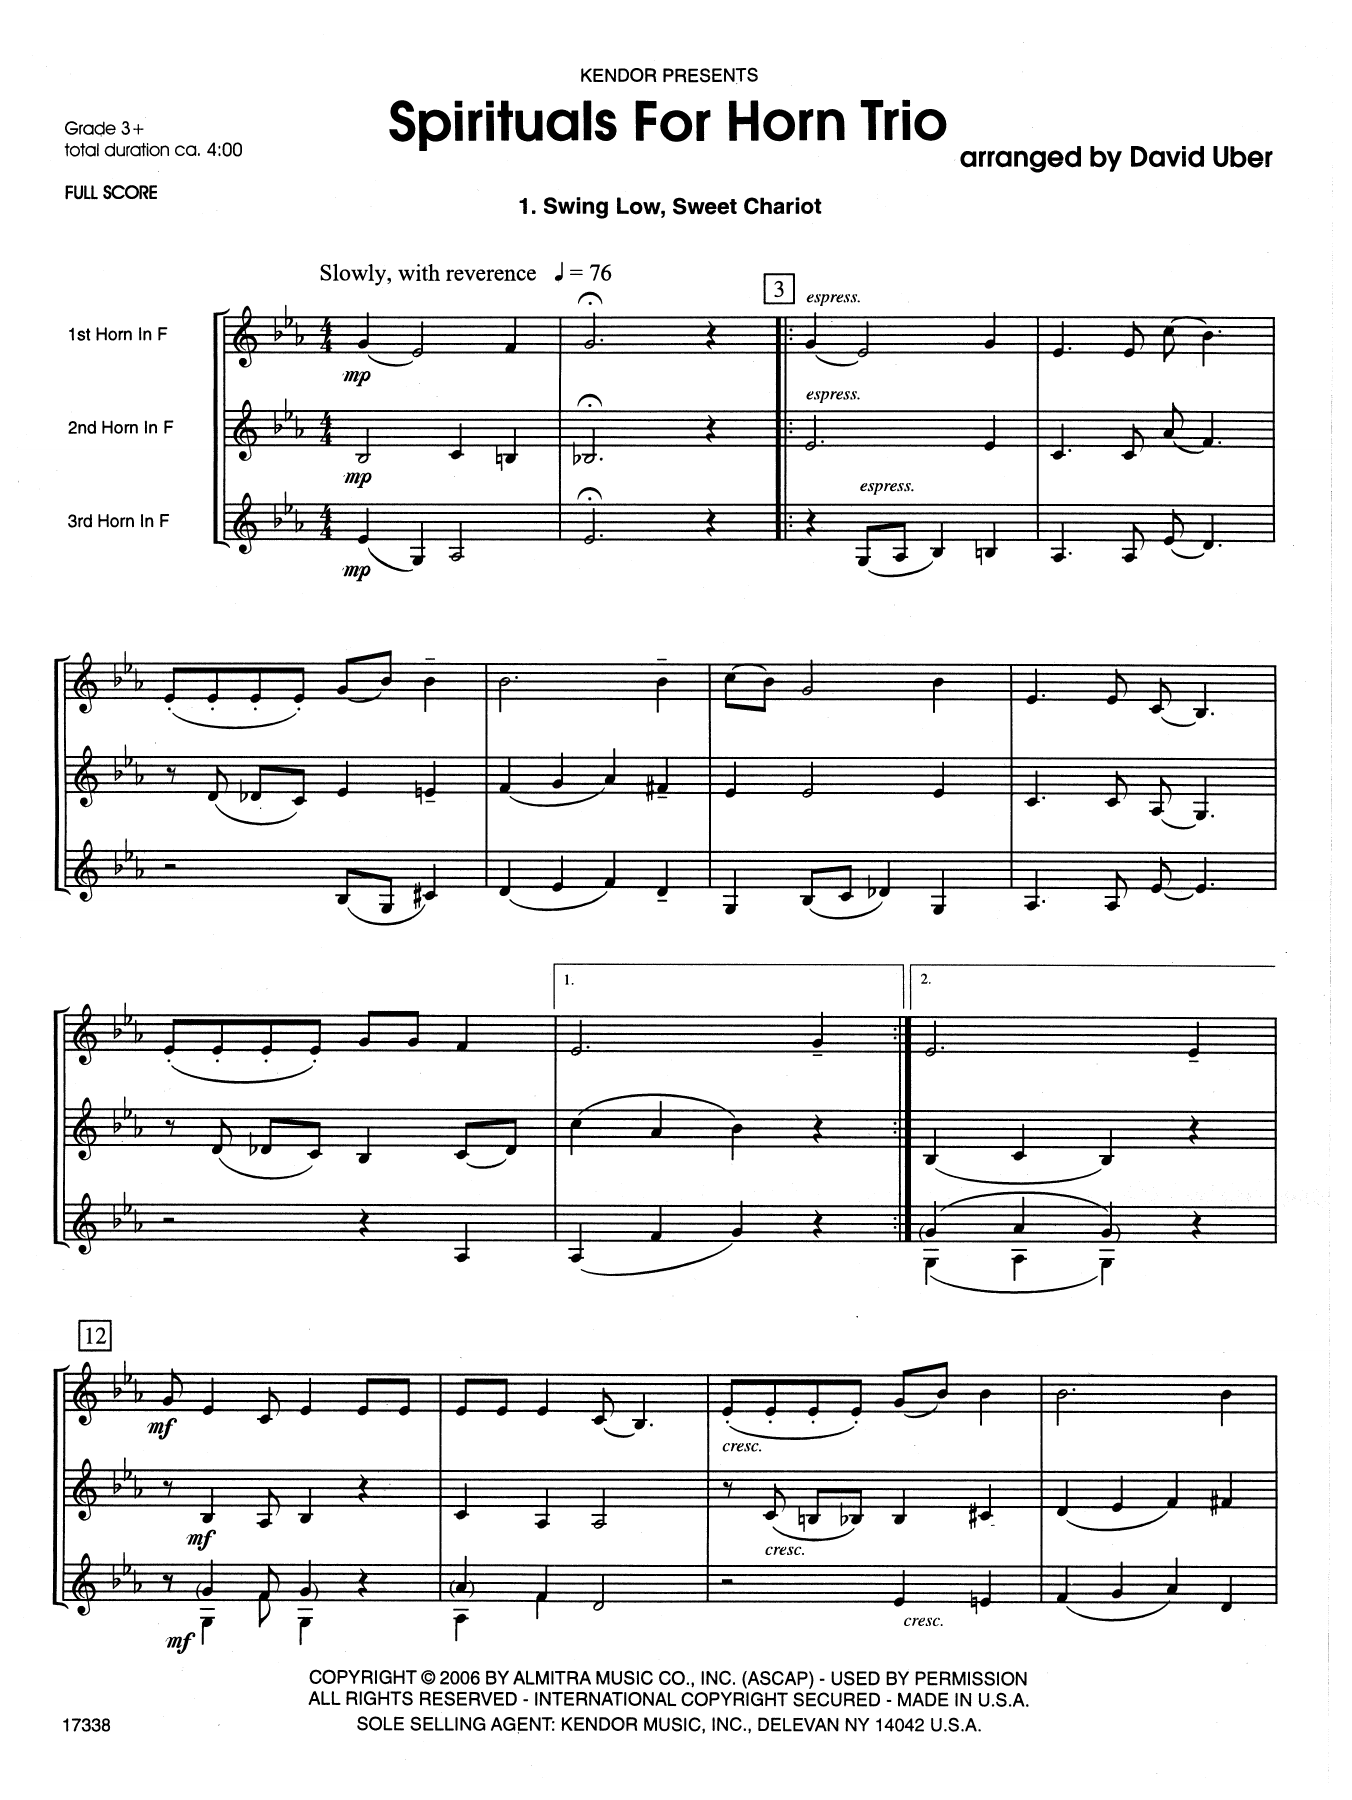 David Uber Spirituals For Horn Trio - Full Score sheet music notes and chords. Download Printable PDF.